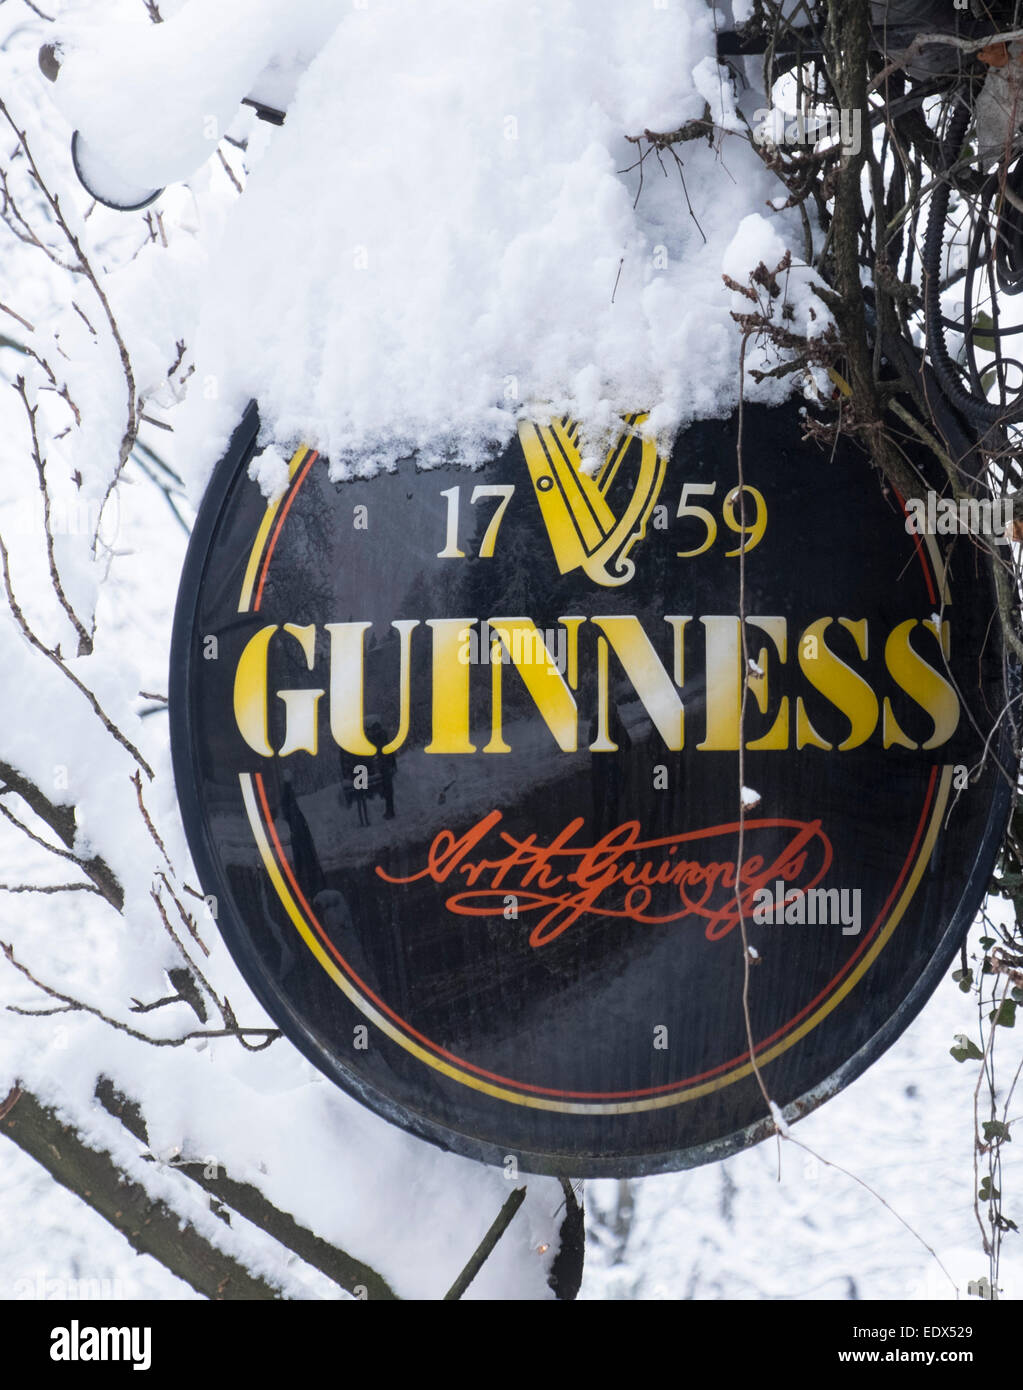 A Guinnes Beer sign covered in snow Stock Photo